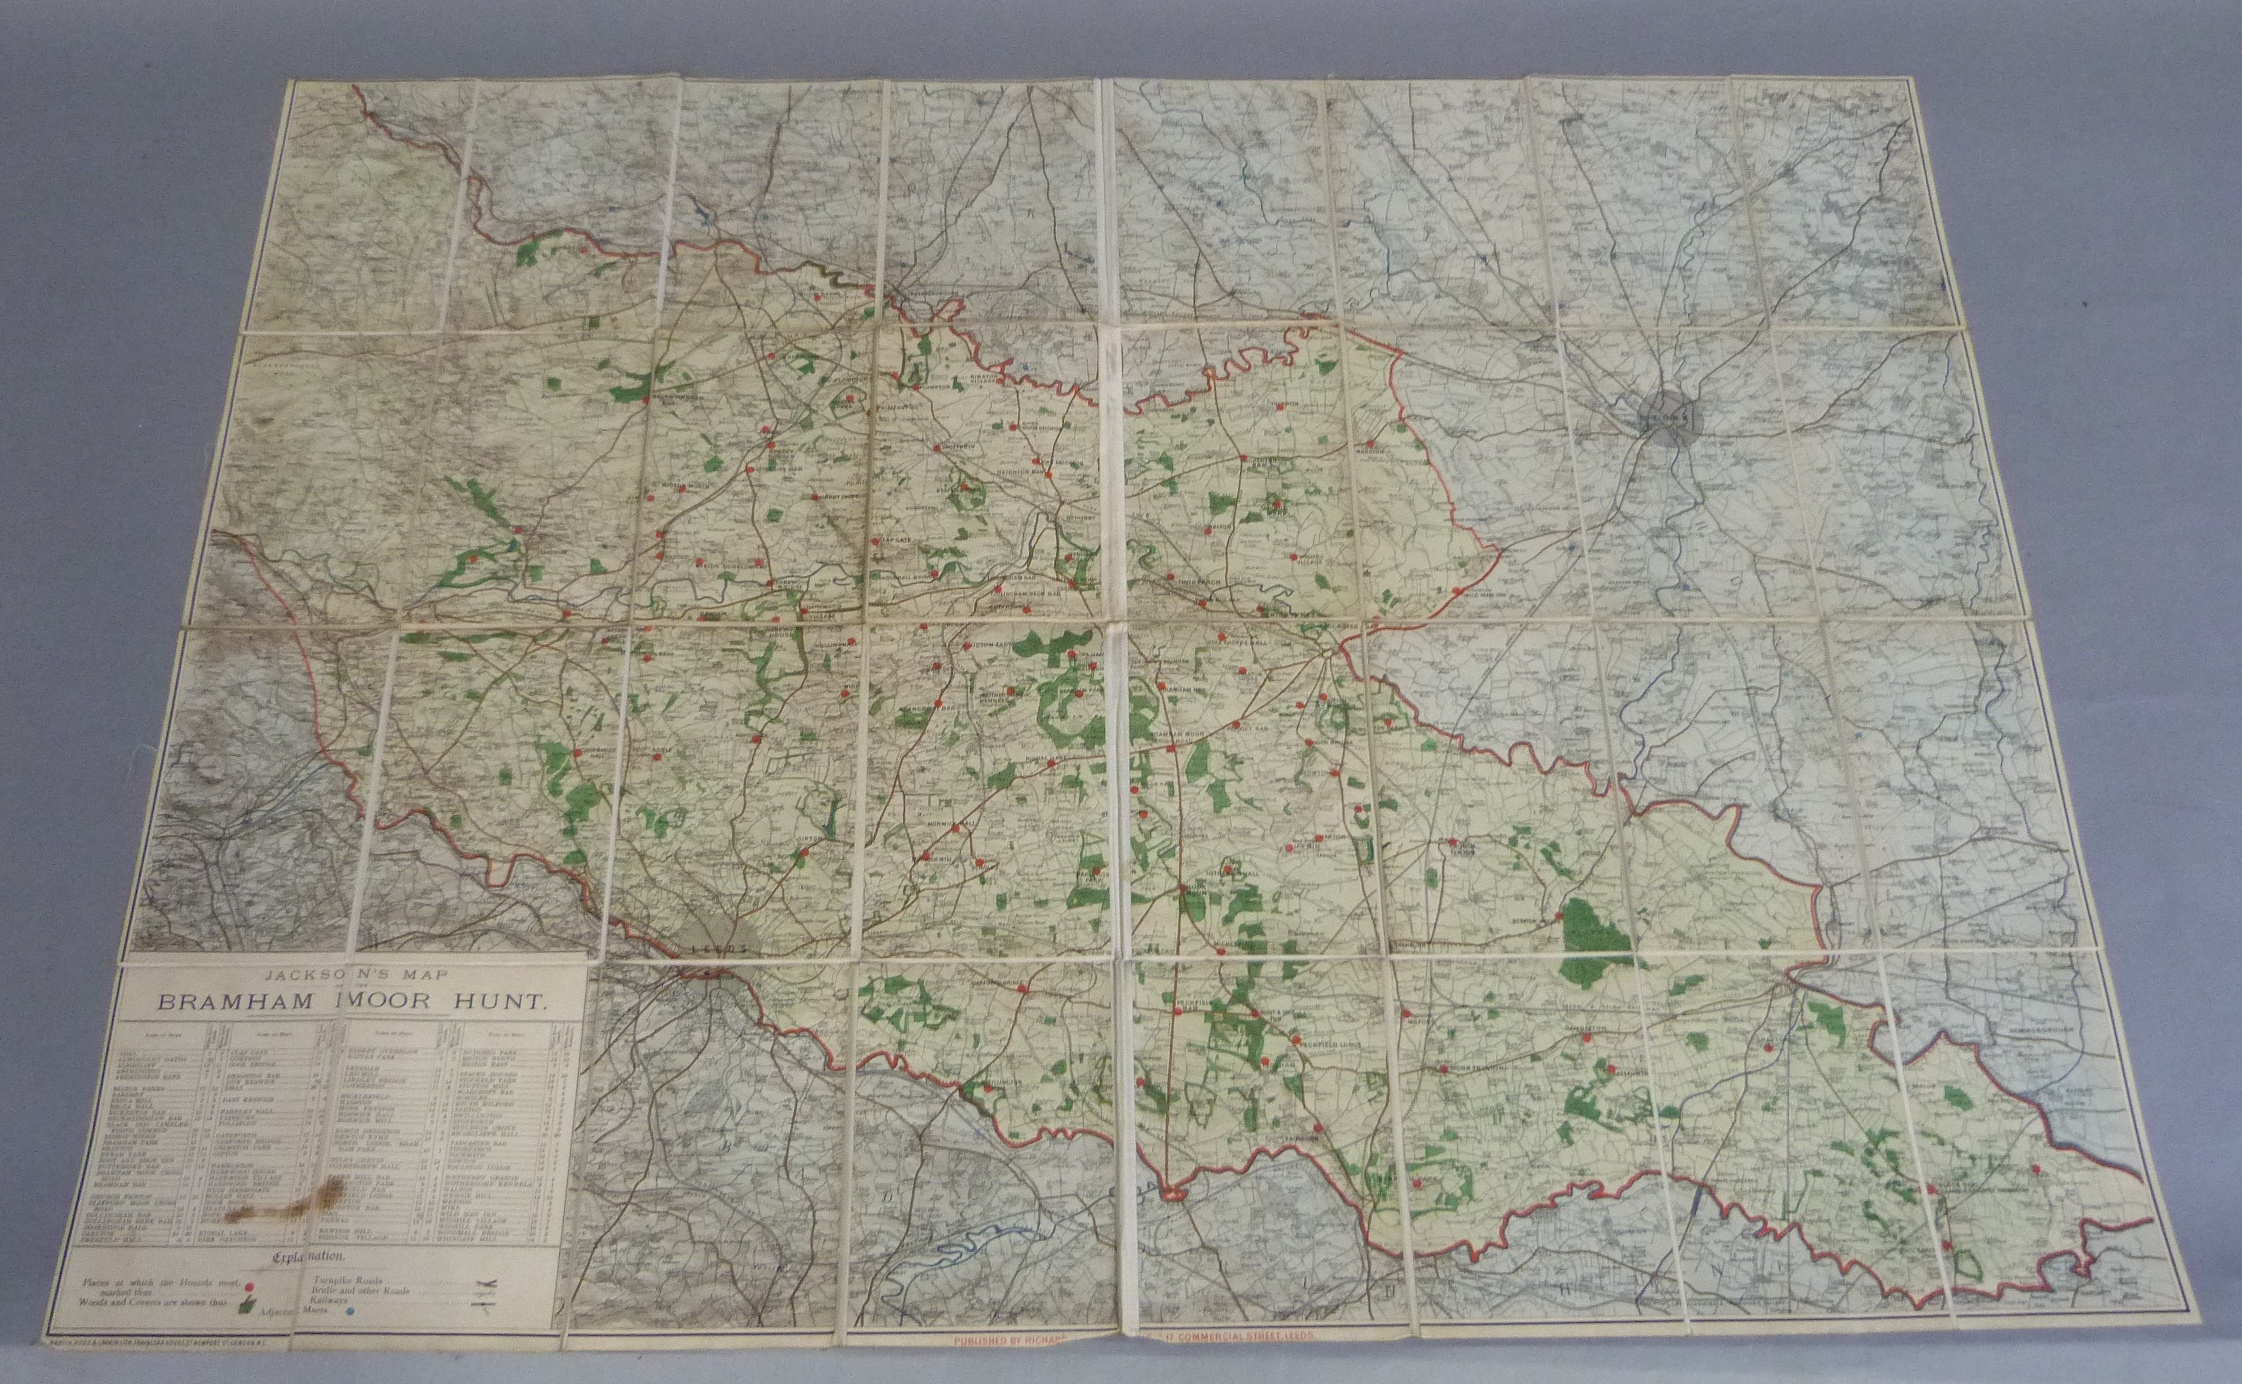 Jackson' Map of The Bramham Moor Hunt and surrounding areas - Image 3 of 5